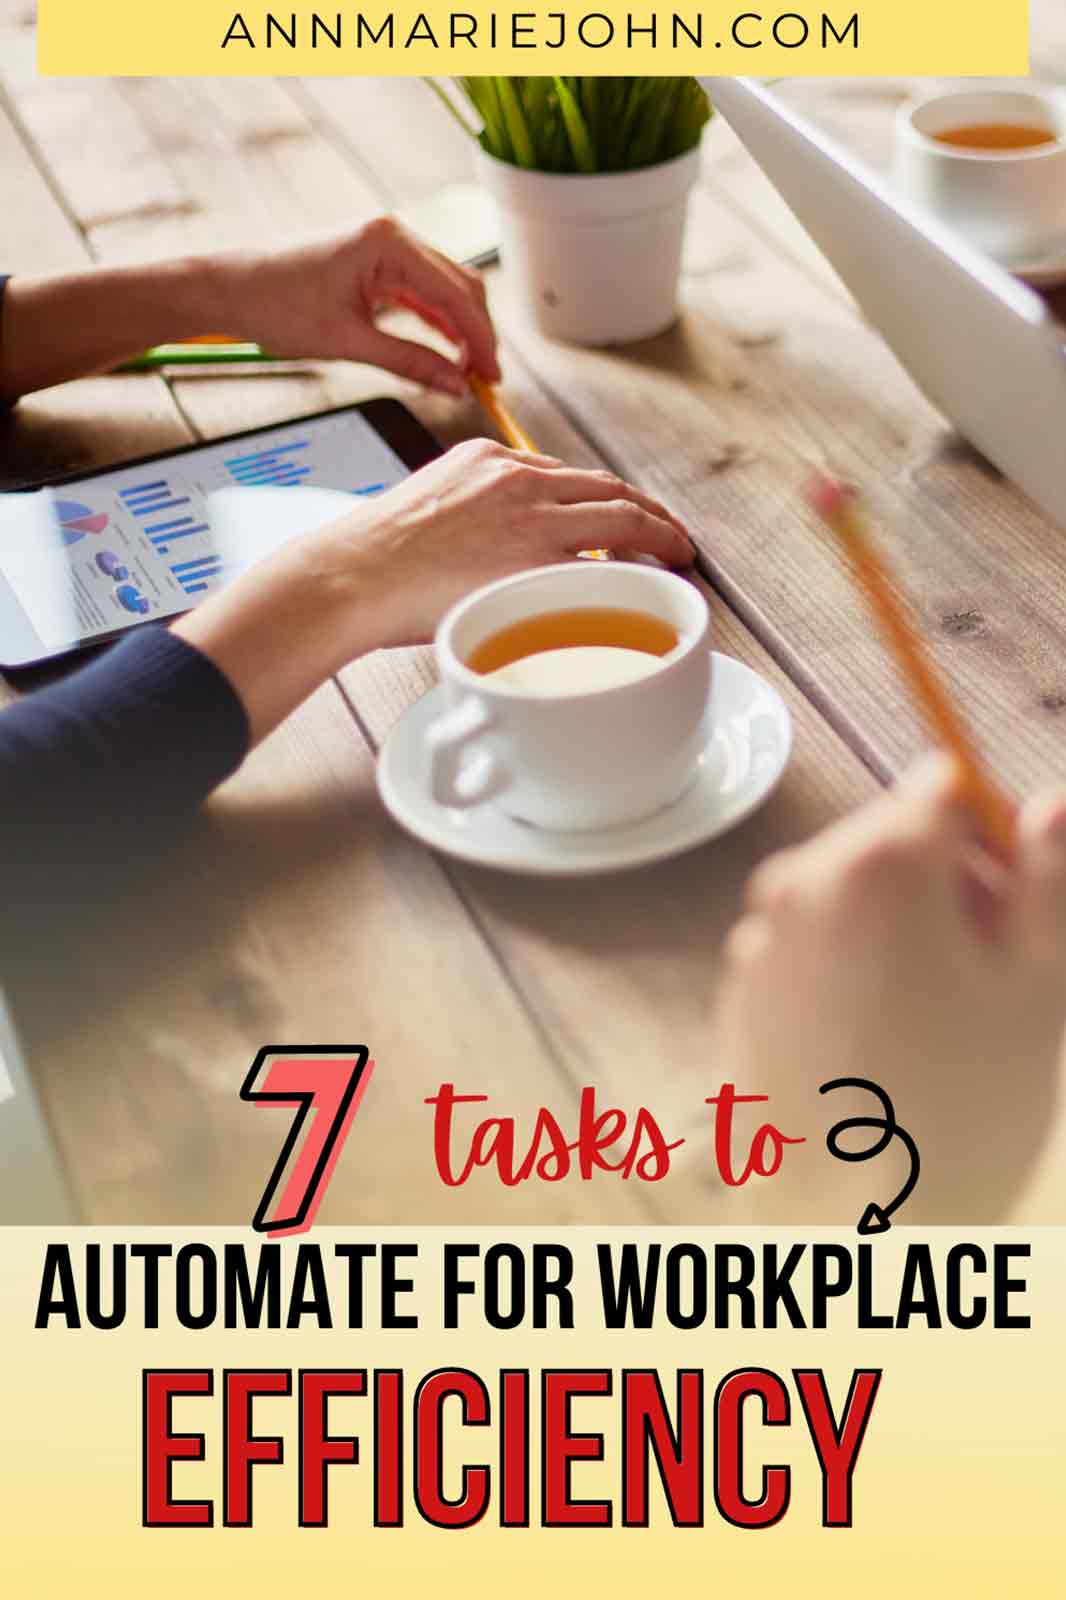 Tasks to Automate for Workplace Efficiency